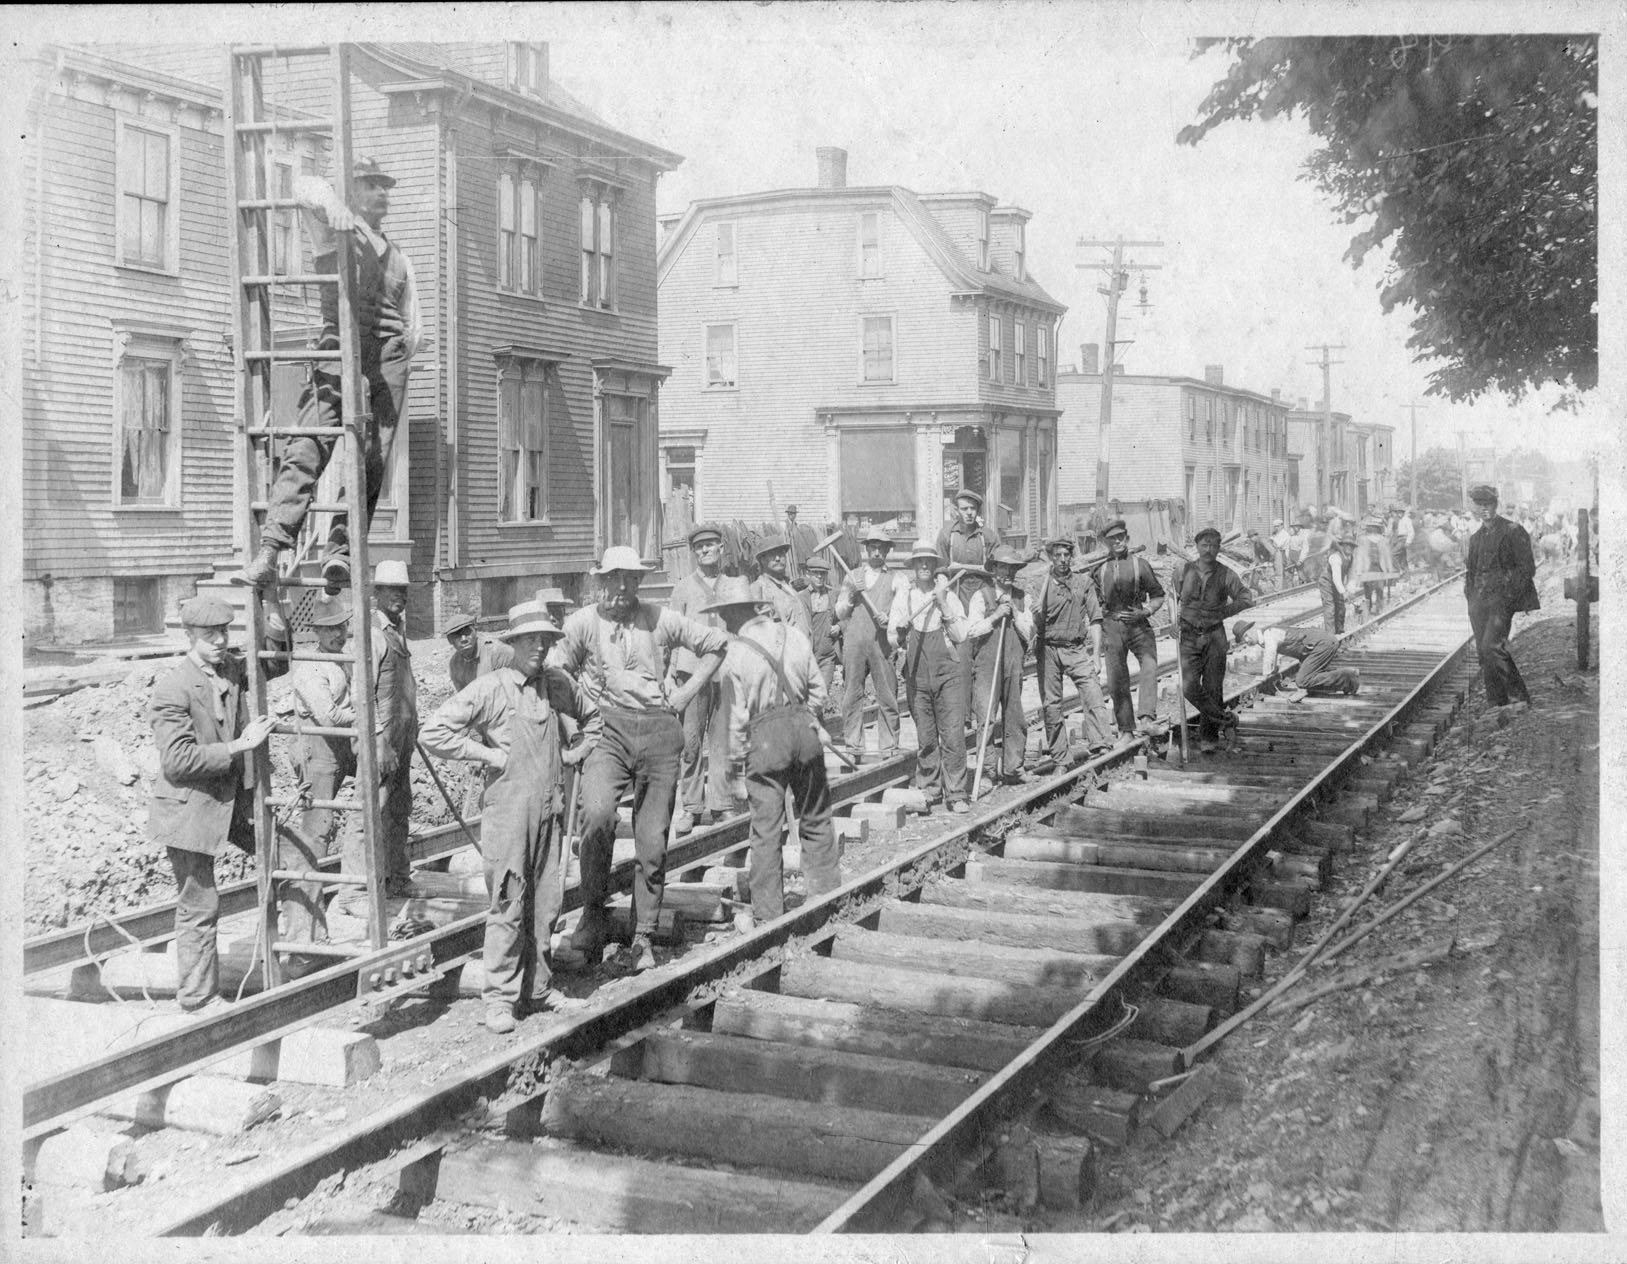 Laying Double Track for Halifax Electric Tramway, possibly Quinpool Road, Halifax, between 1906 and 1912